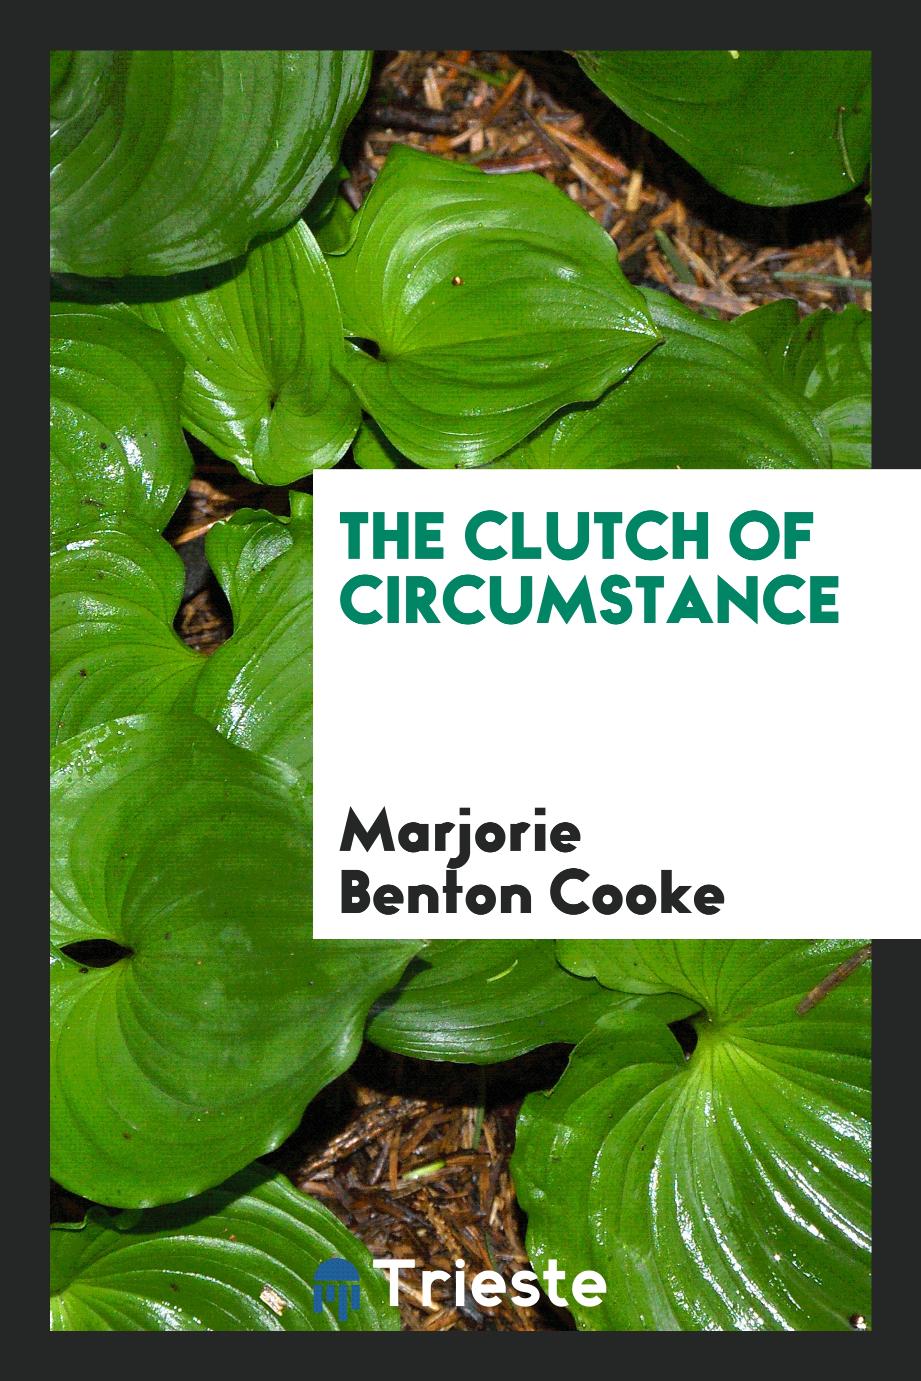 The clutch of circumstance